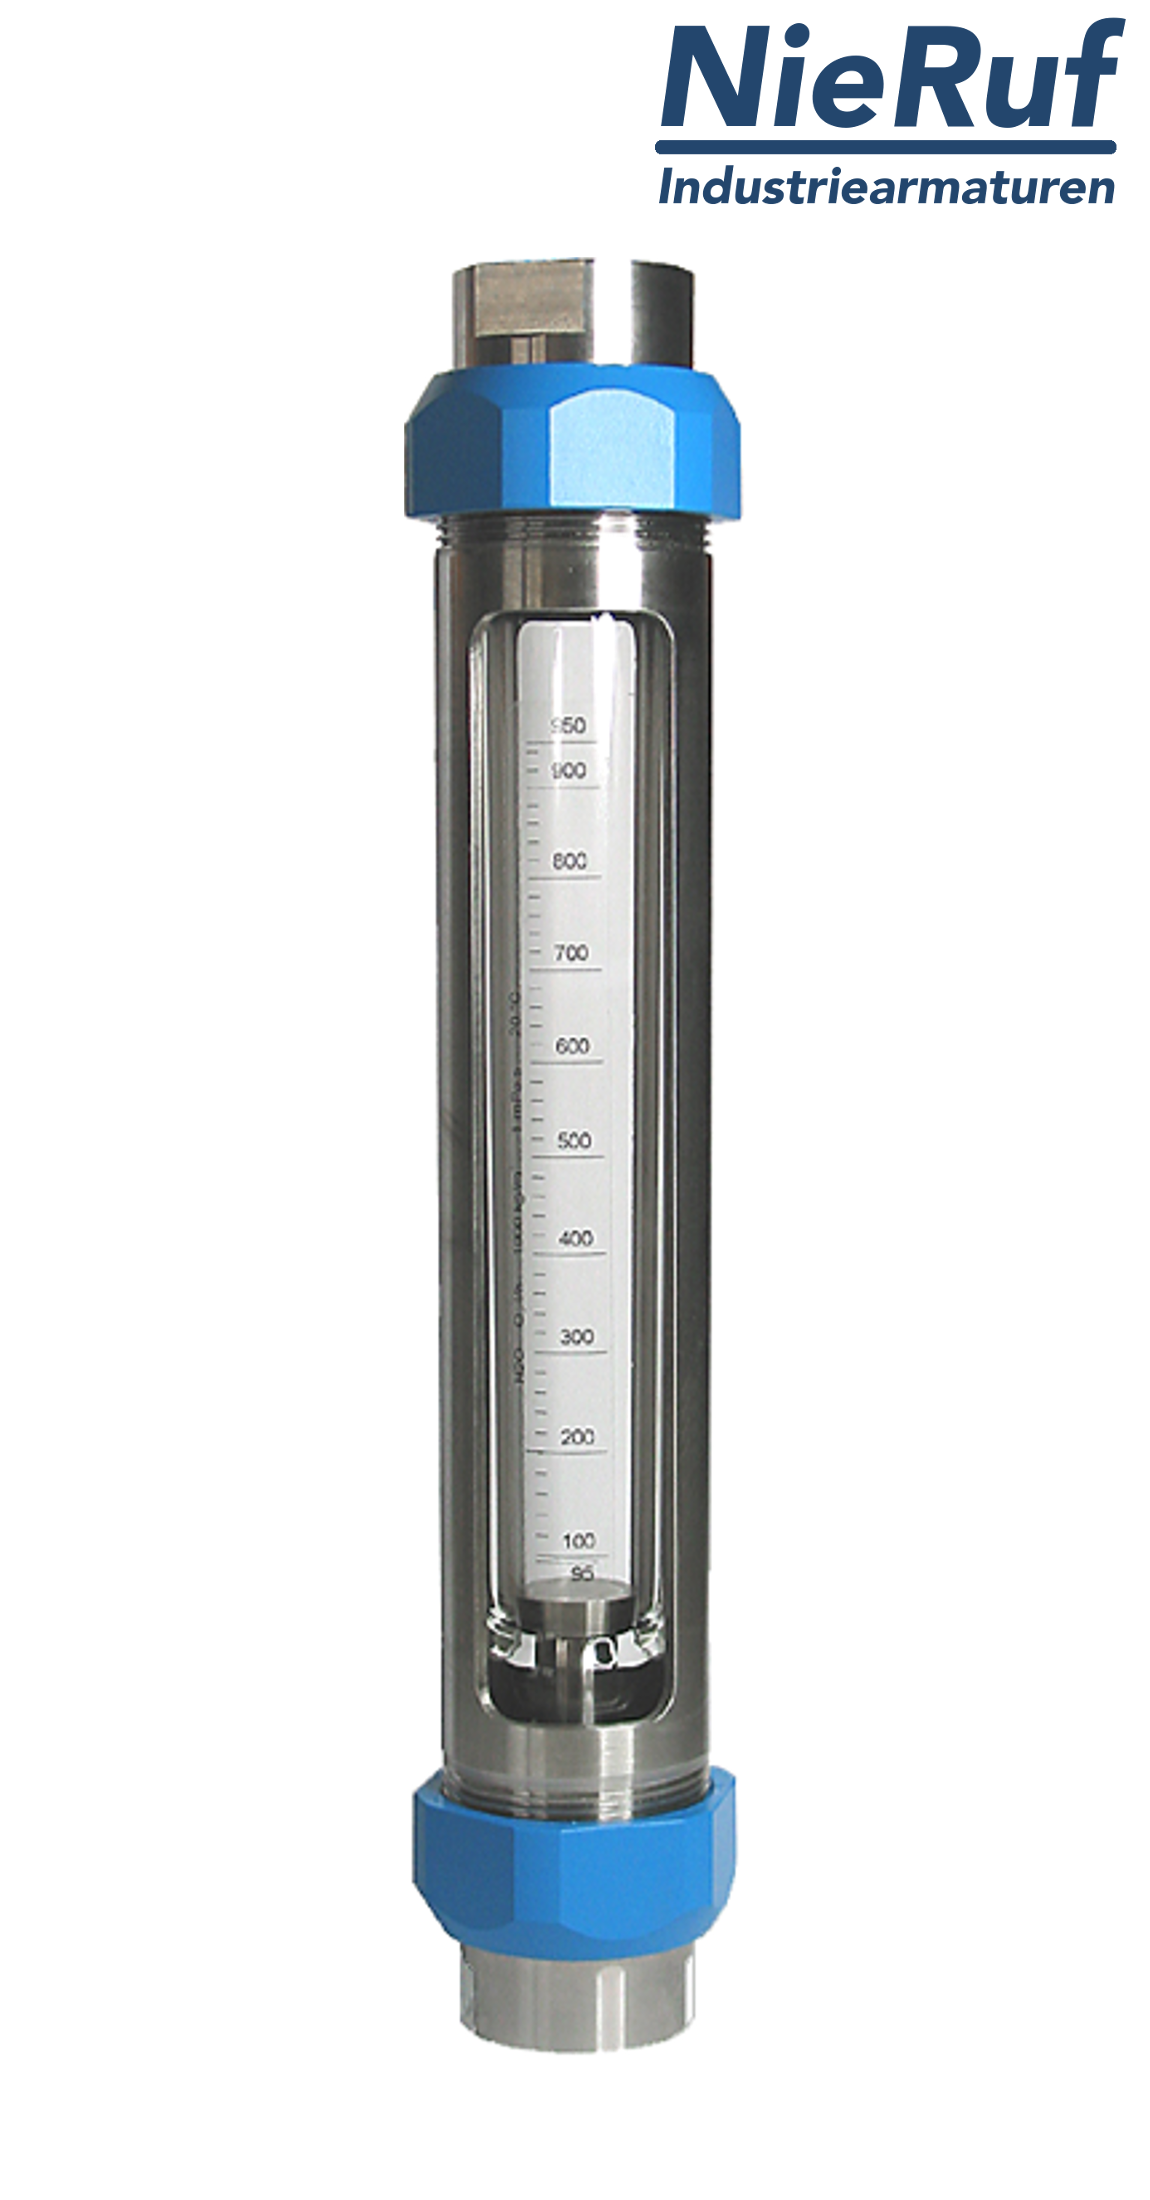 Variable area flowmeter stainless steel + borosilicate 1/2" inch 1.0 - 10.0 l/h water FKM